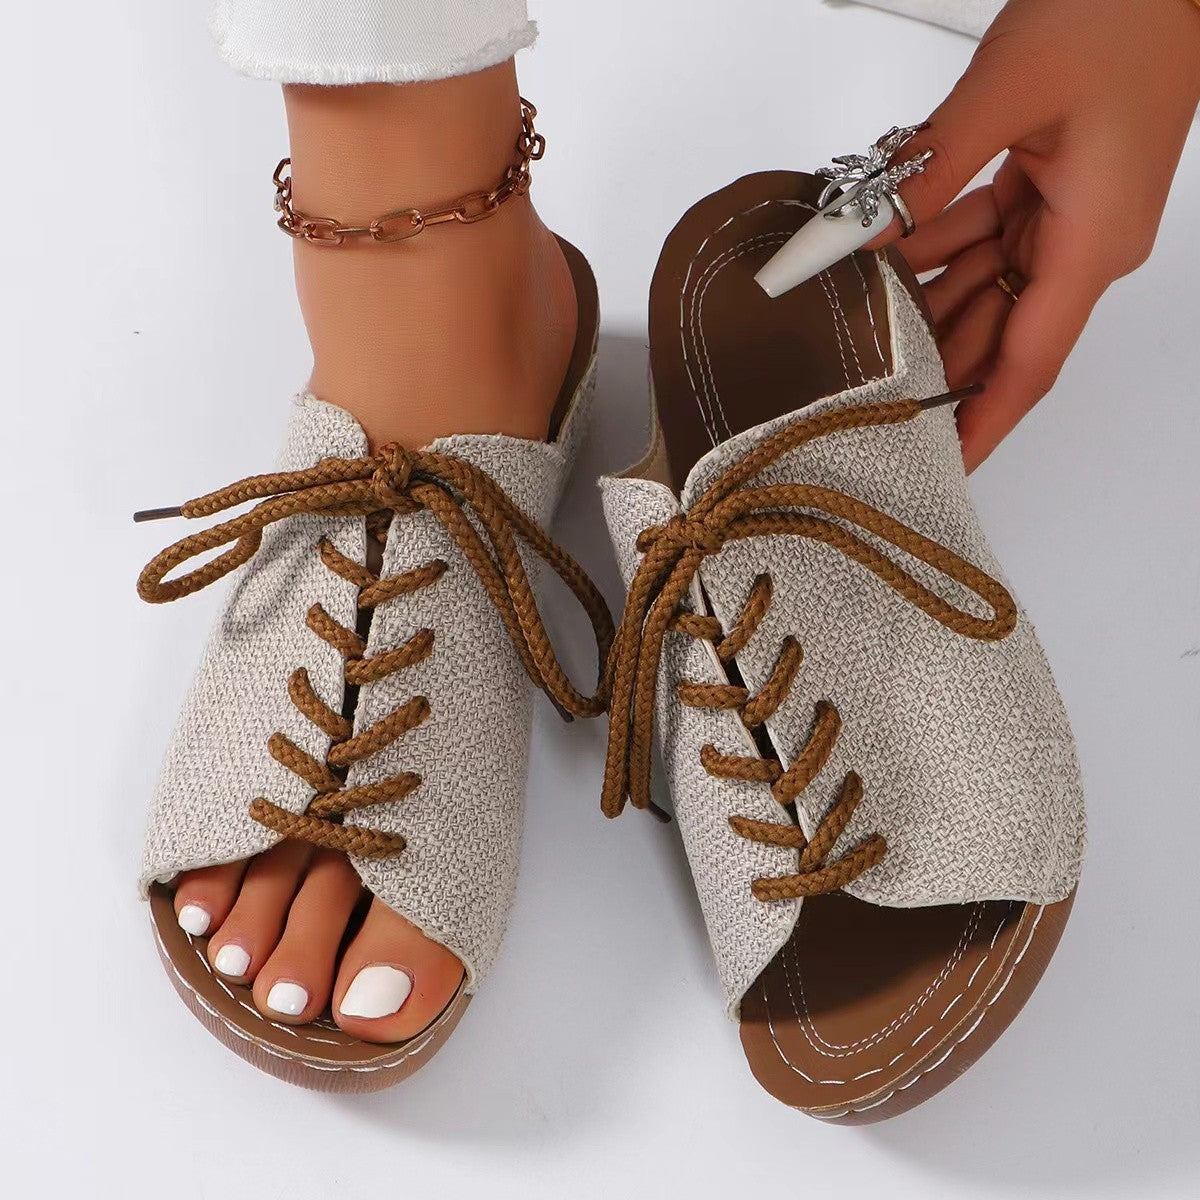 Lace-Up Open Toe Wedge Sandals Accessories for women